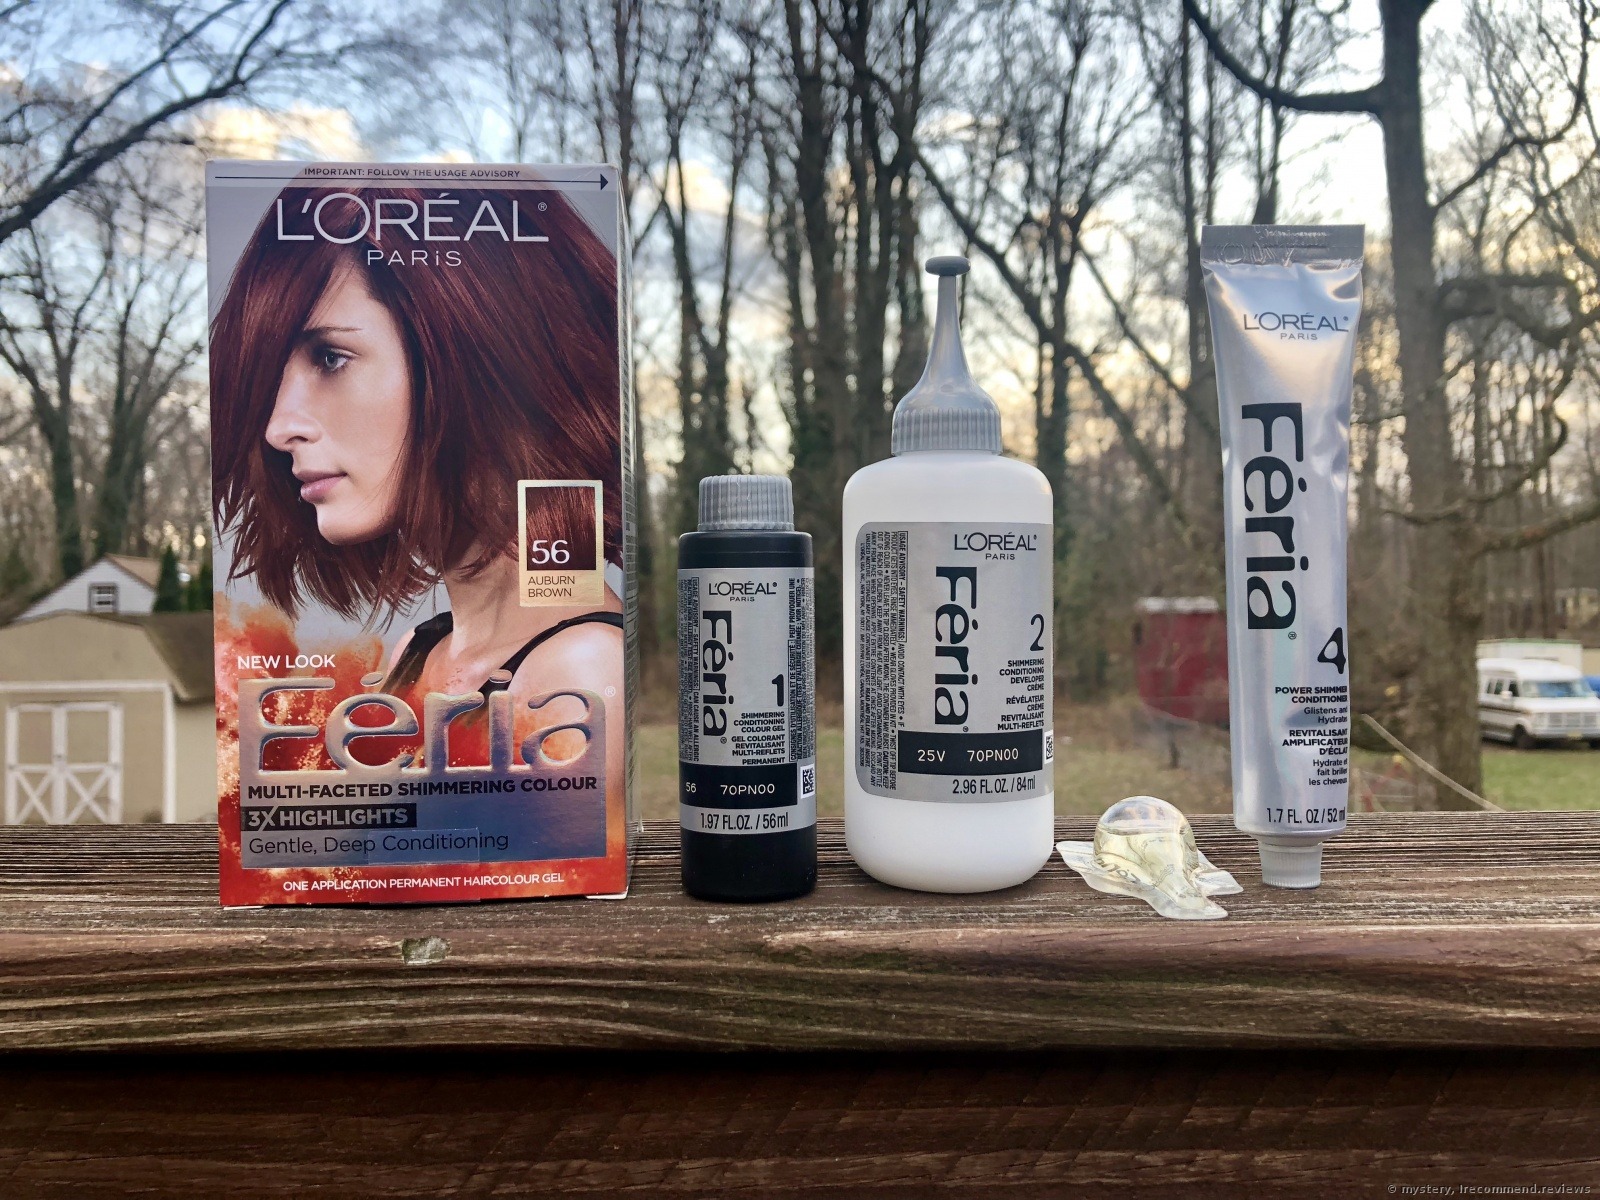 3. L'Oreal Paris Feria Multi-Faceted Shimmering Permanent Hair Color in Smokey Silver - wide 6